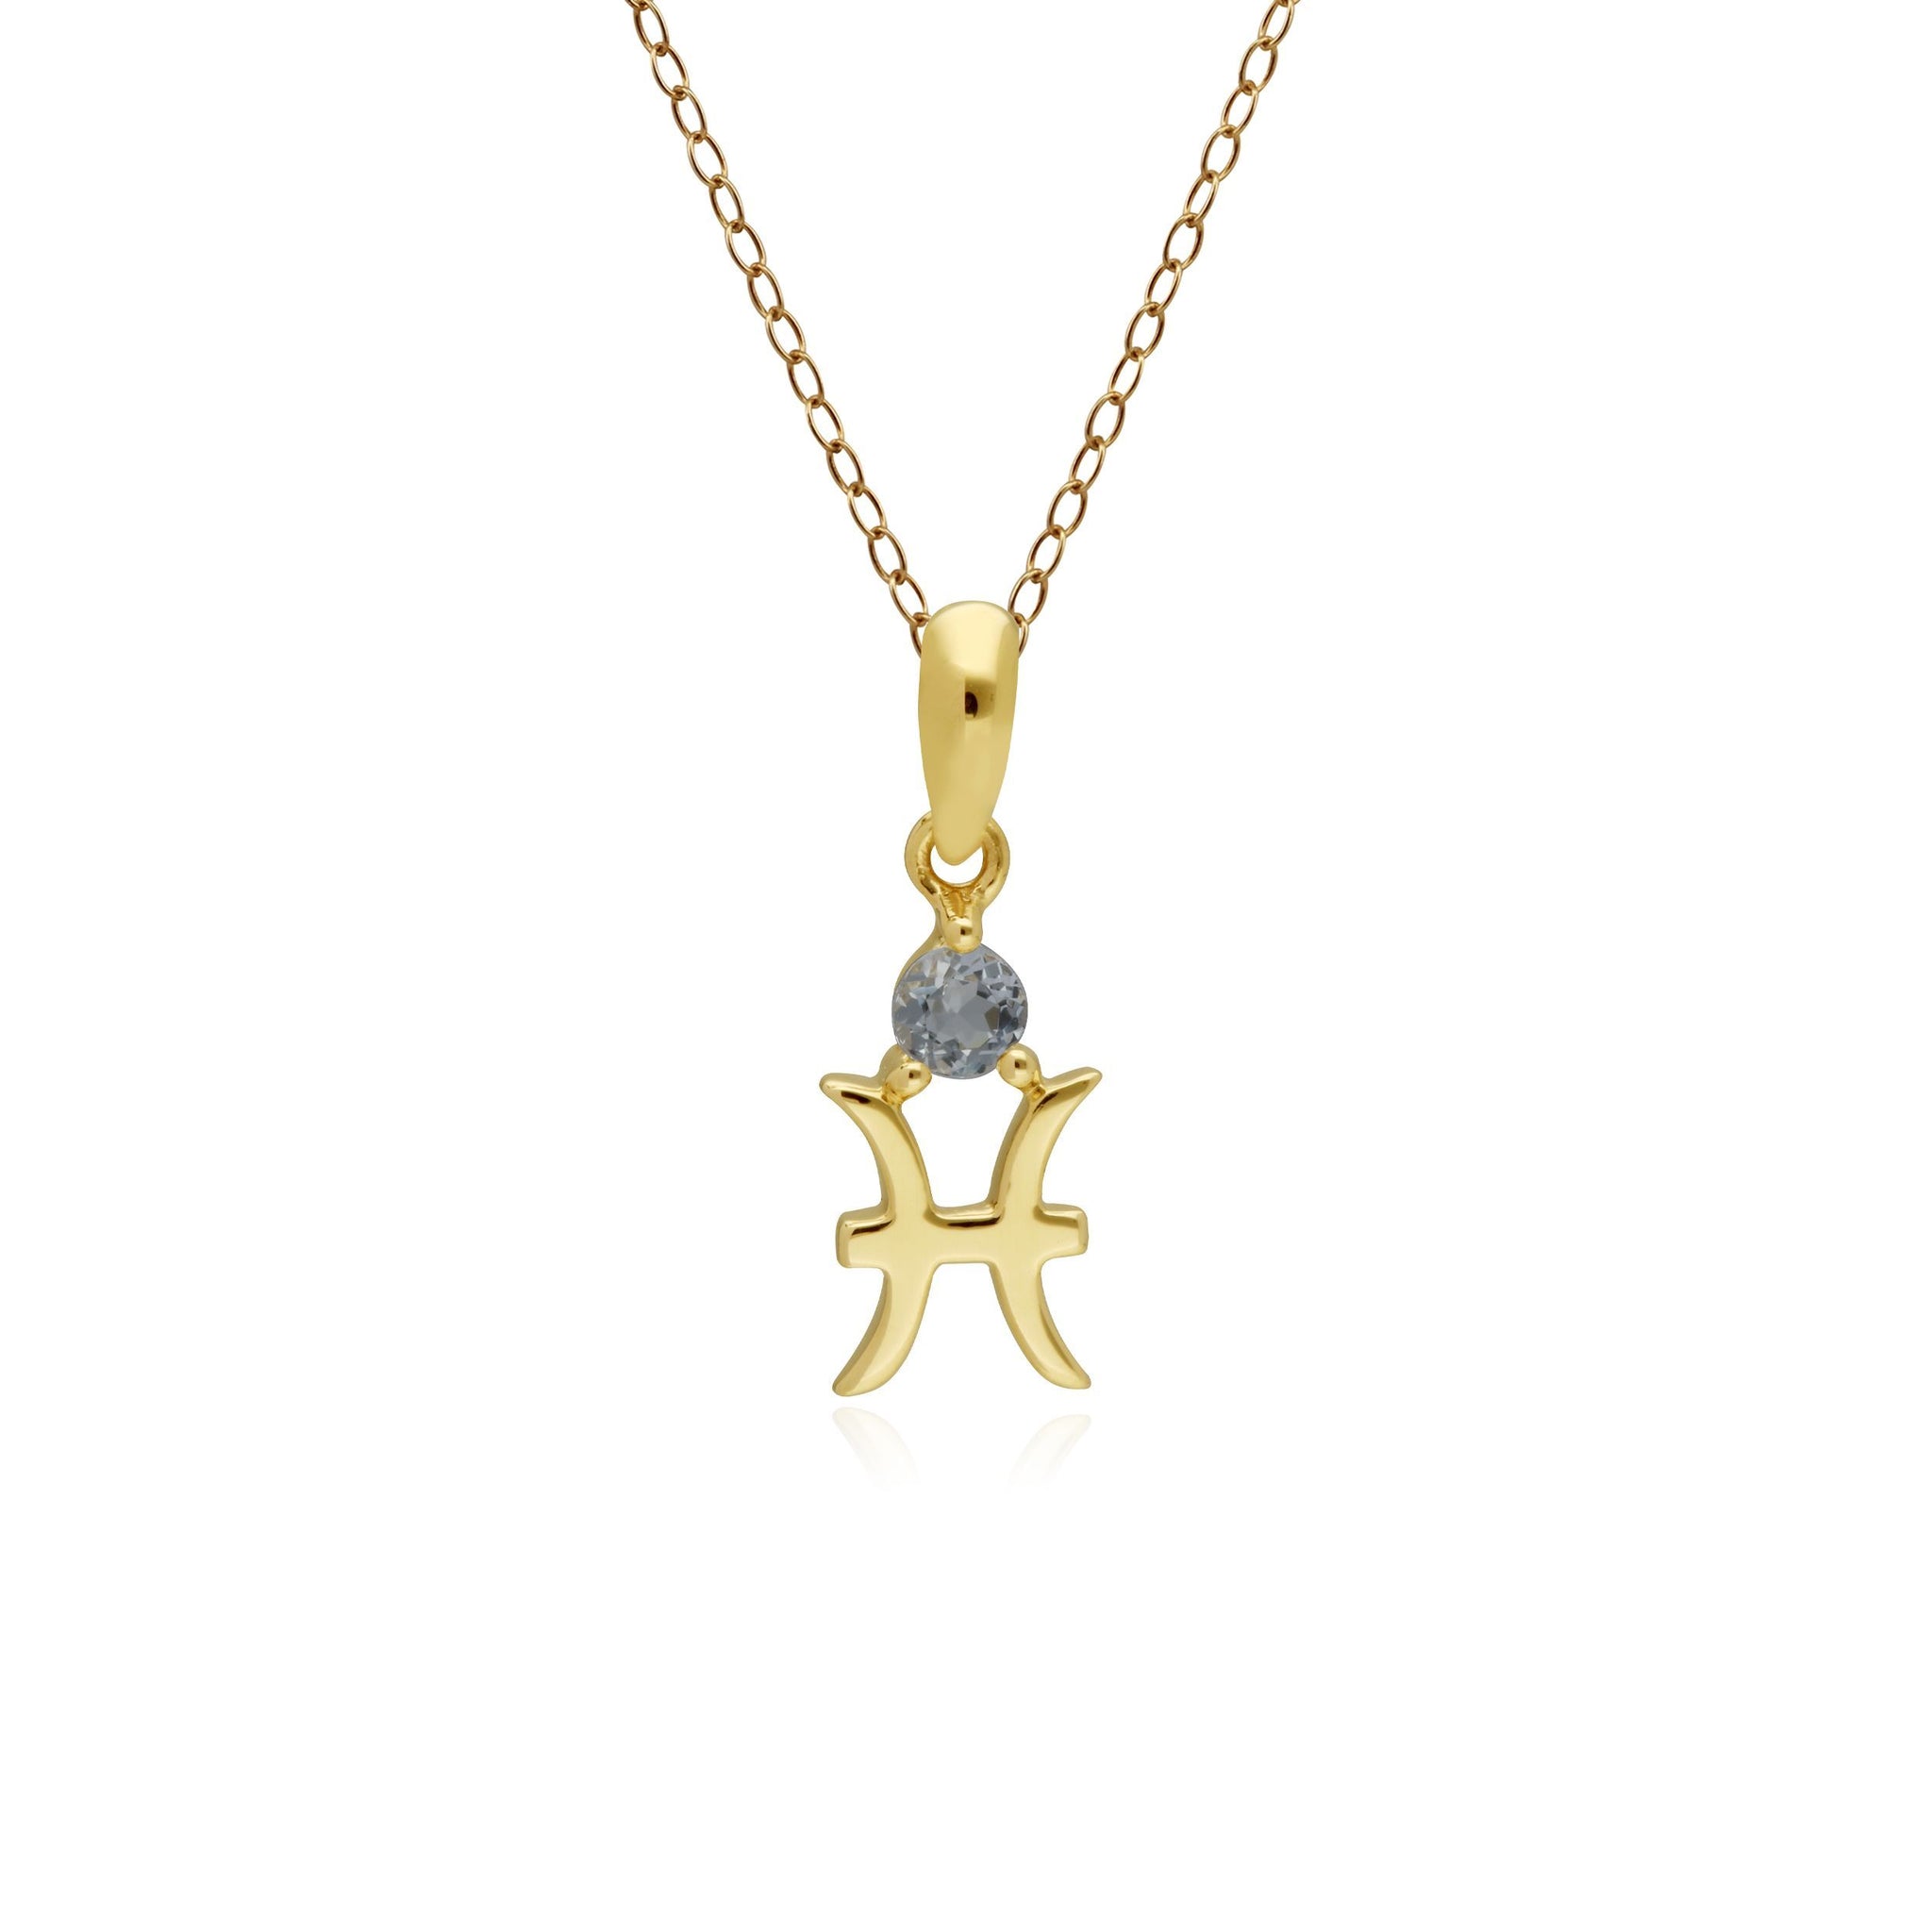 Aquamarine Pisces Zodiac Charm Necklace in 9ct Yellow Gold